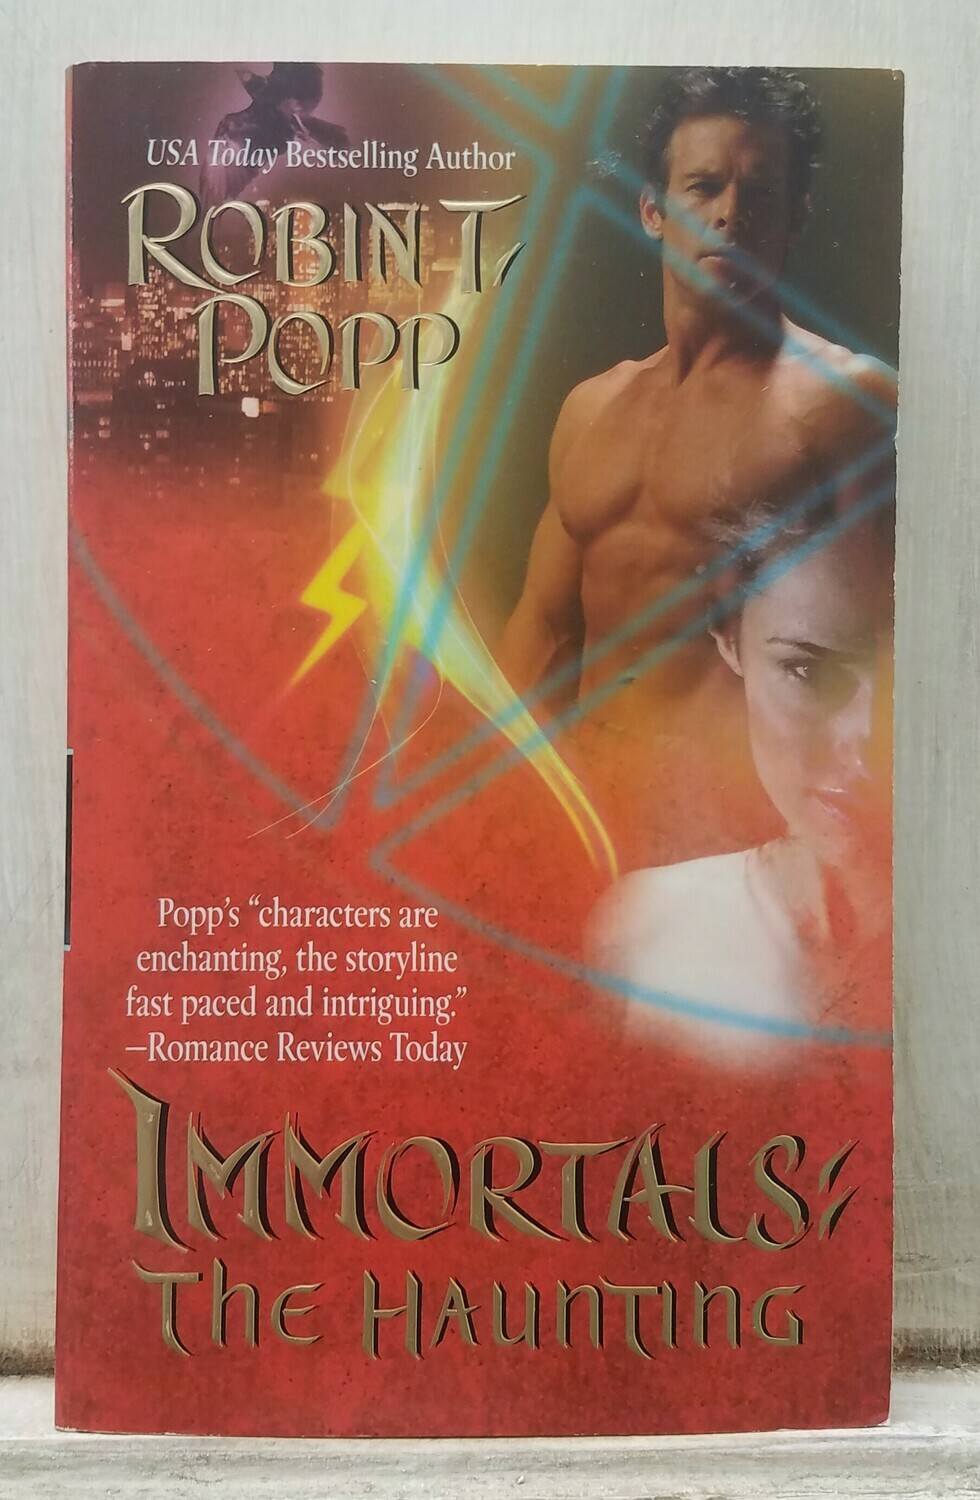 Immortals: The Haunting by Robin T. Popp